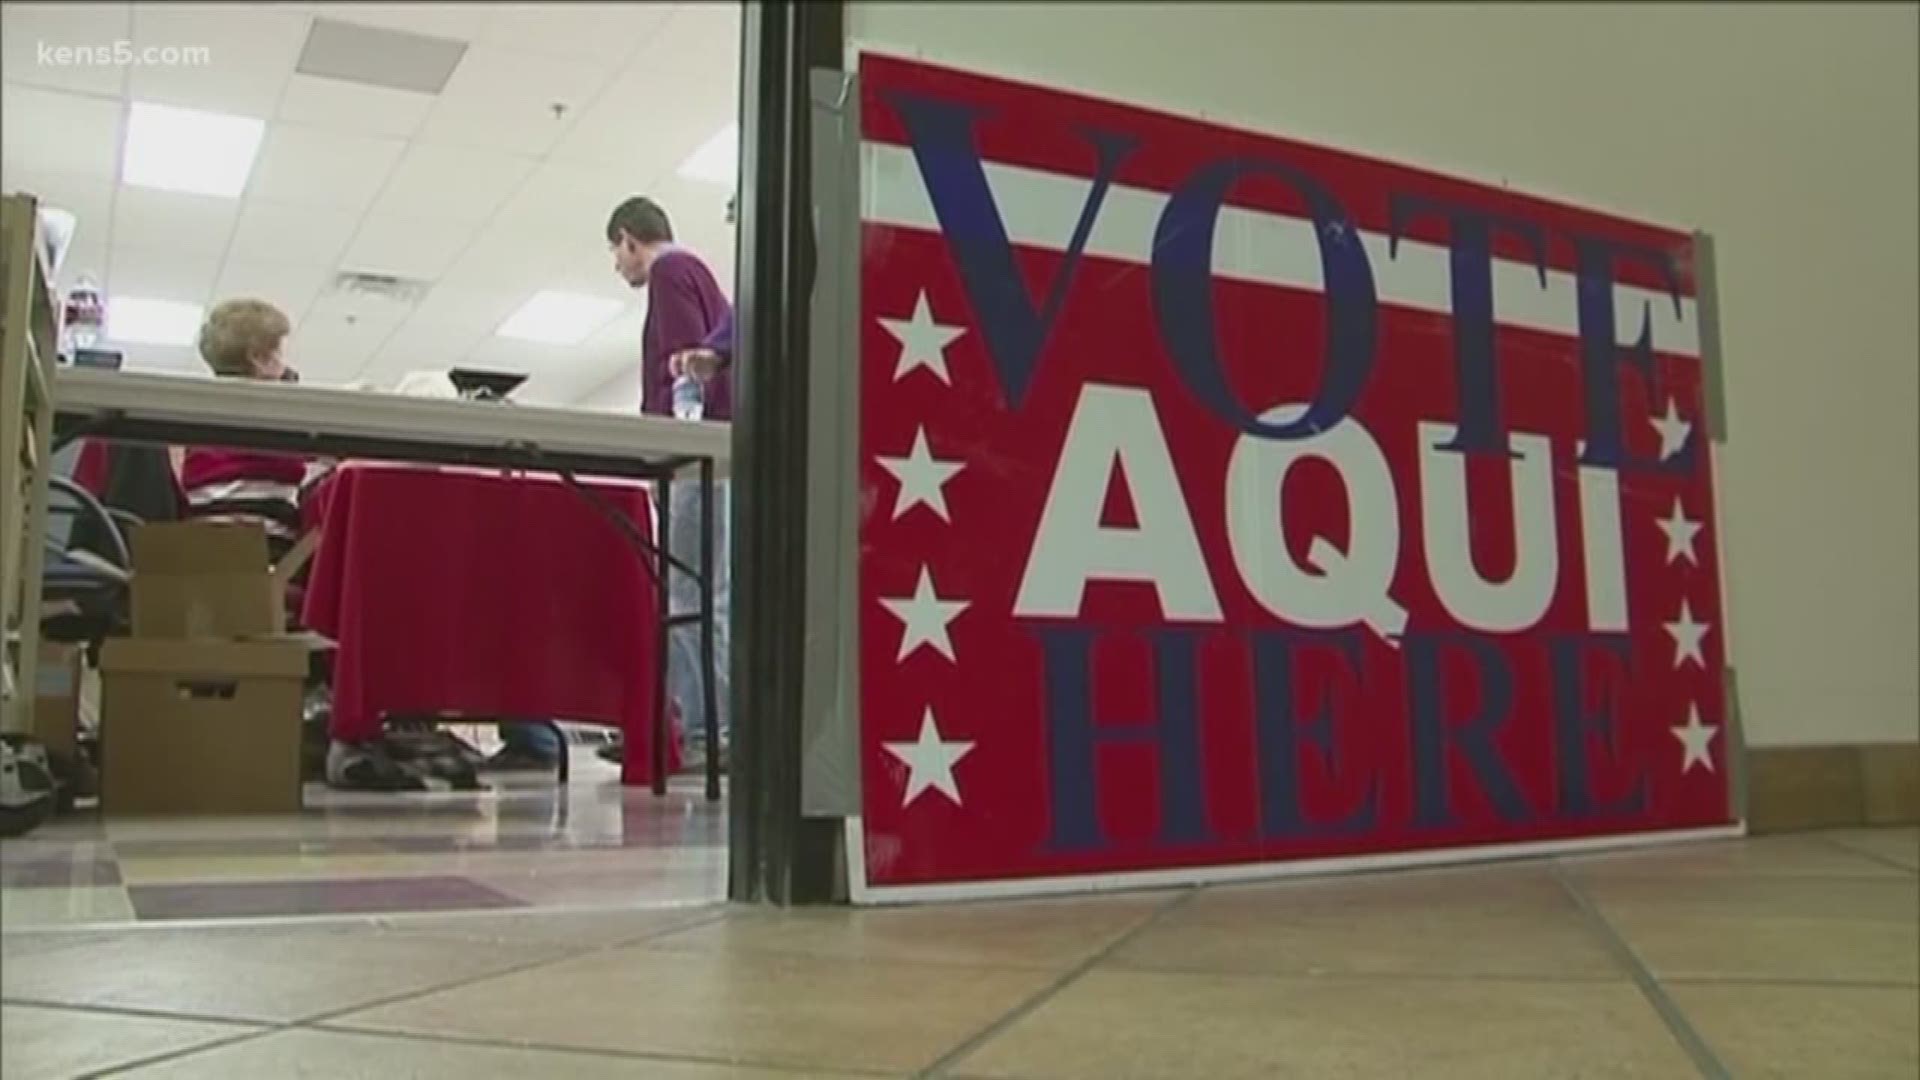 Voters across Texas have been inundated with texts, calls, and emails for weeks about an election in November. Eyewitness News reporter Aaron Wright joins us with how you can take action to stop the calls and keep your sanity.